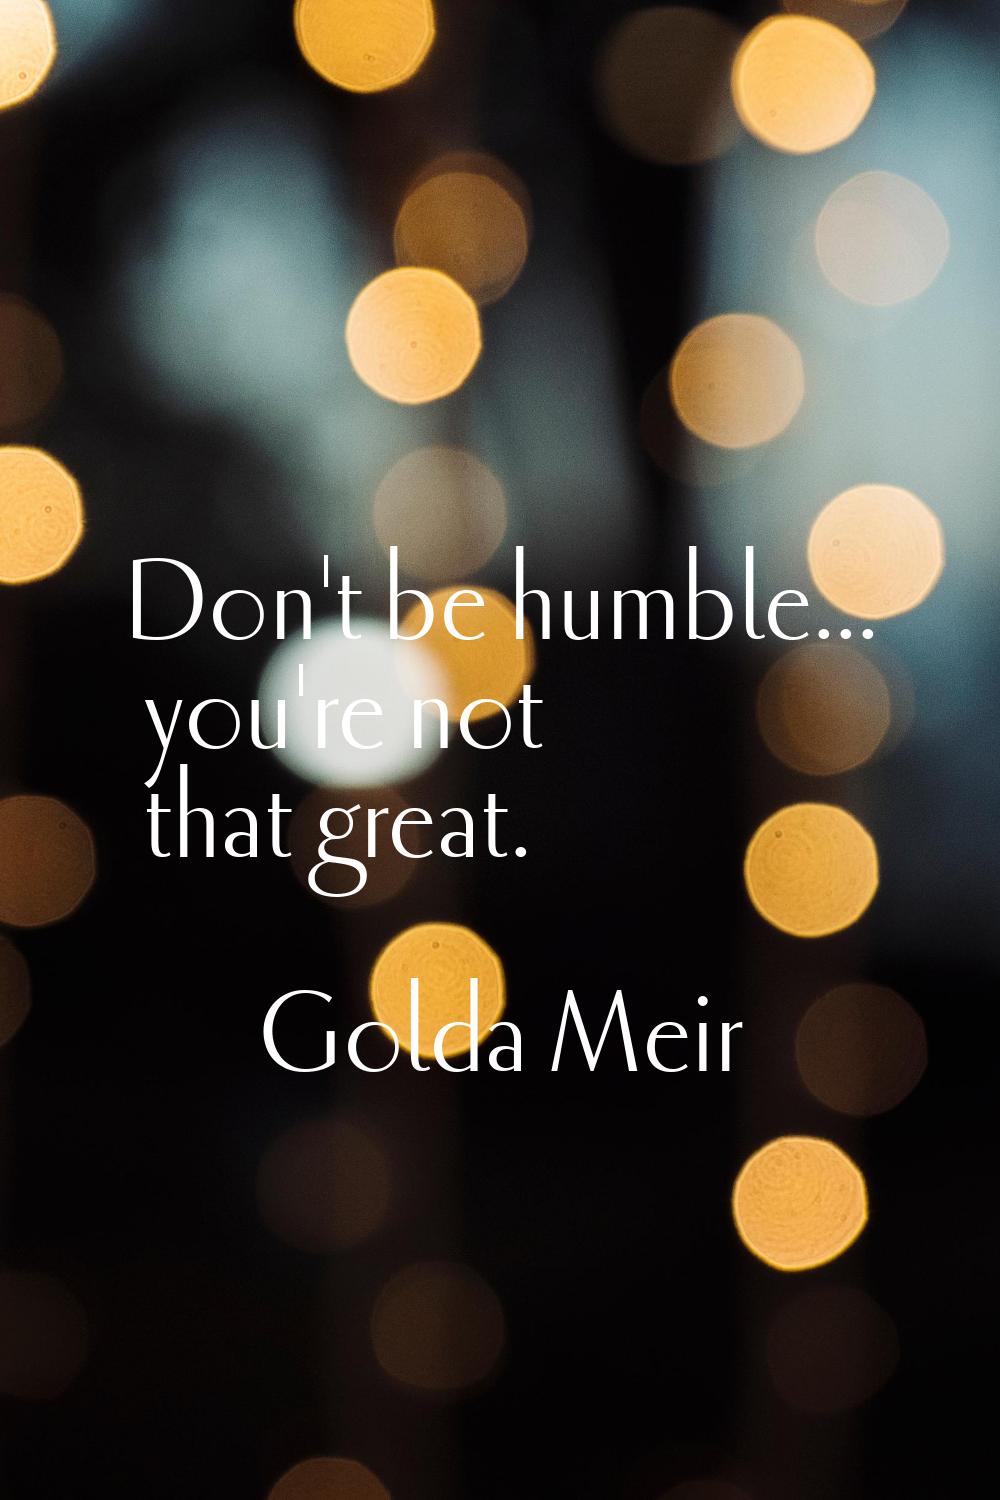 Don't be humble... you're not that great.